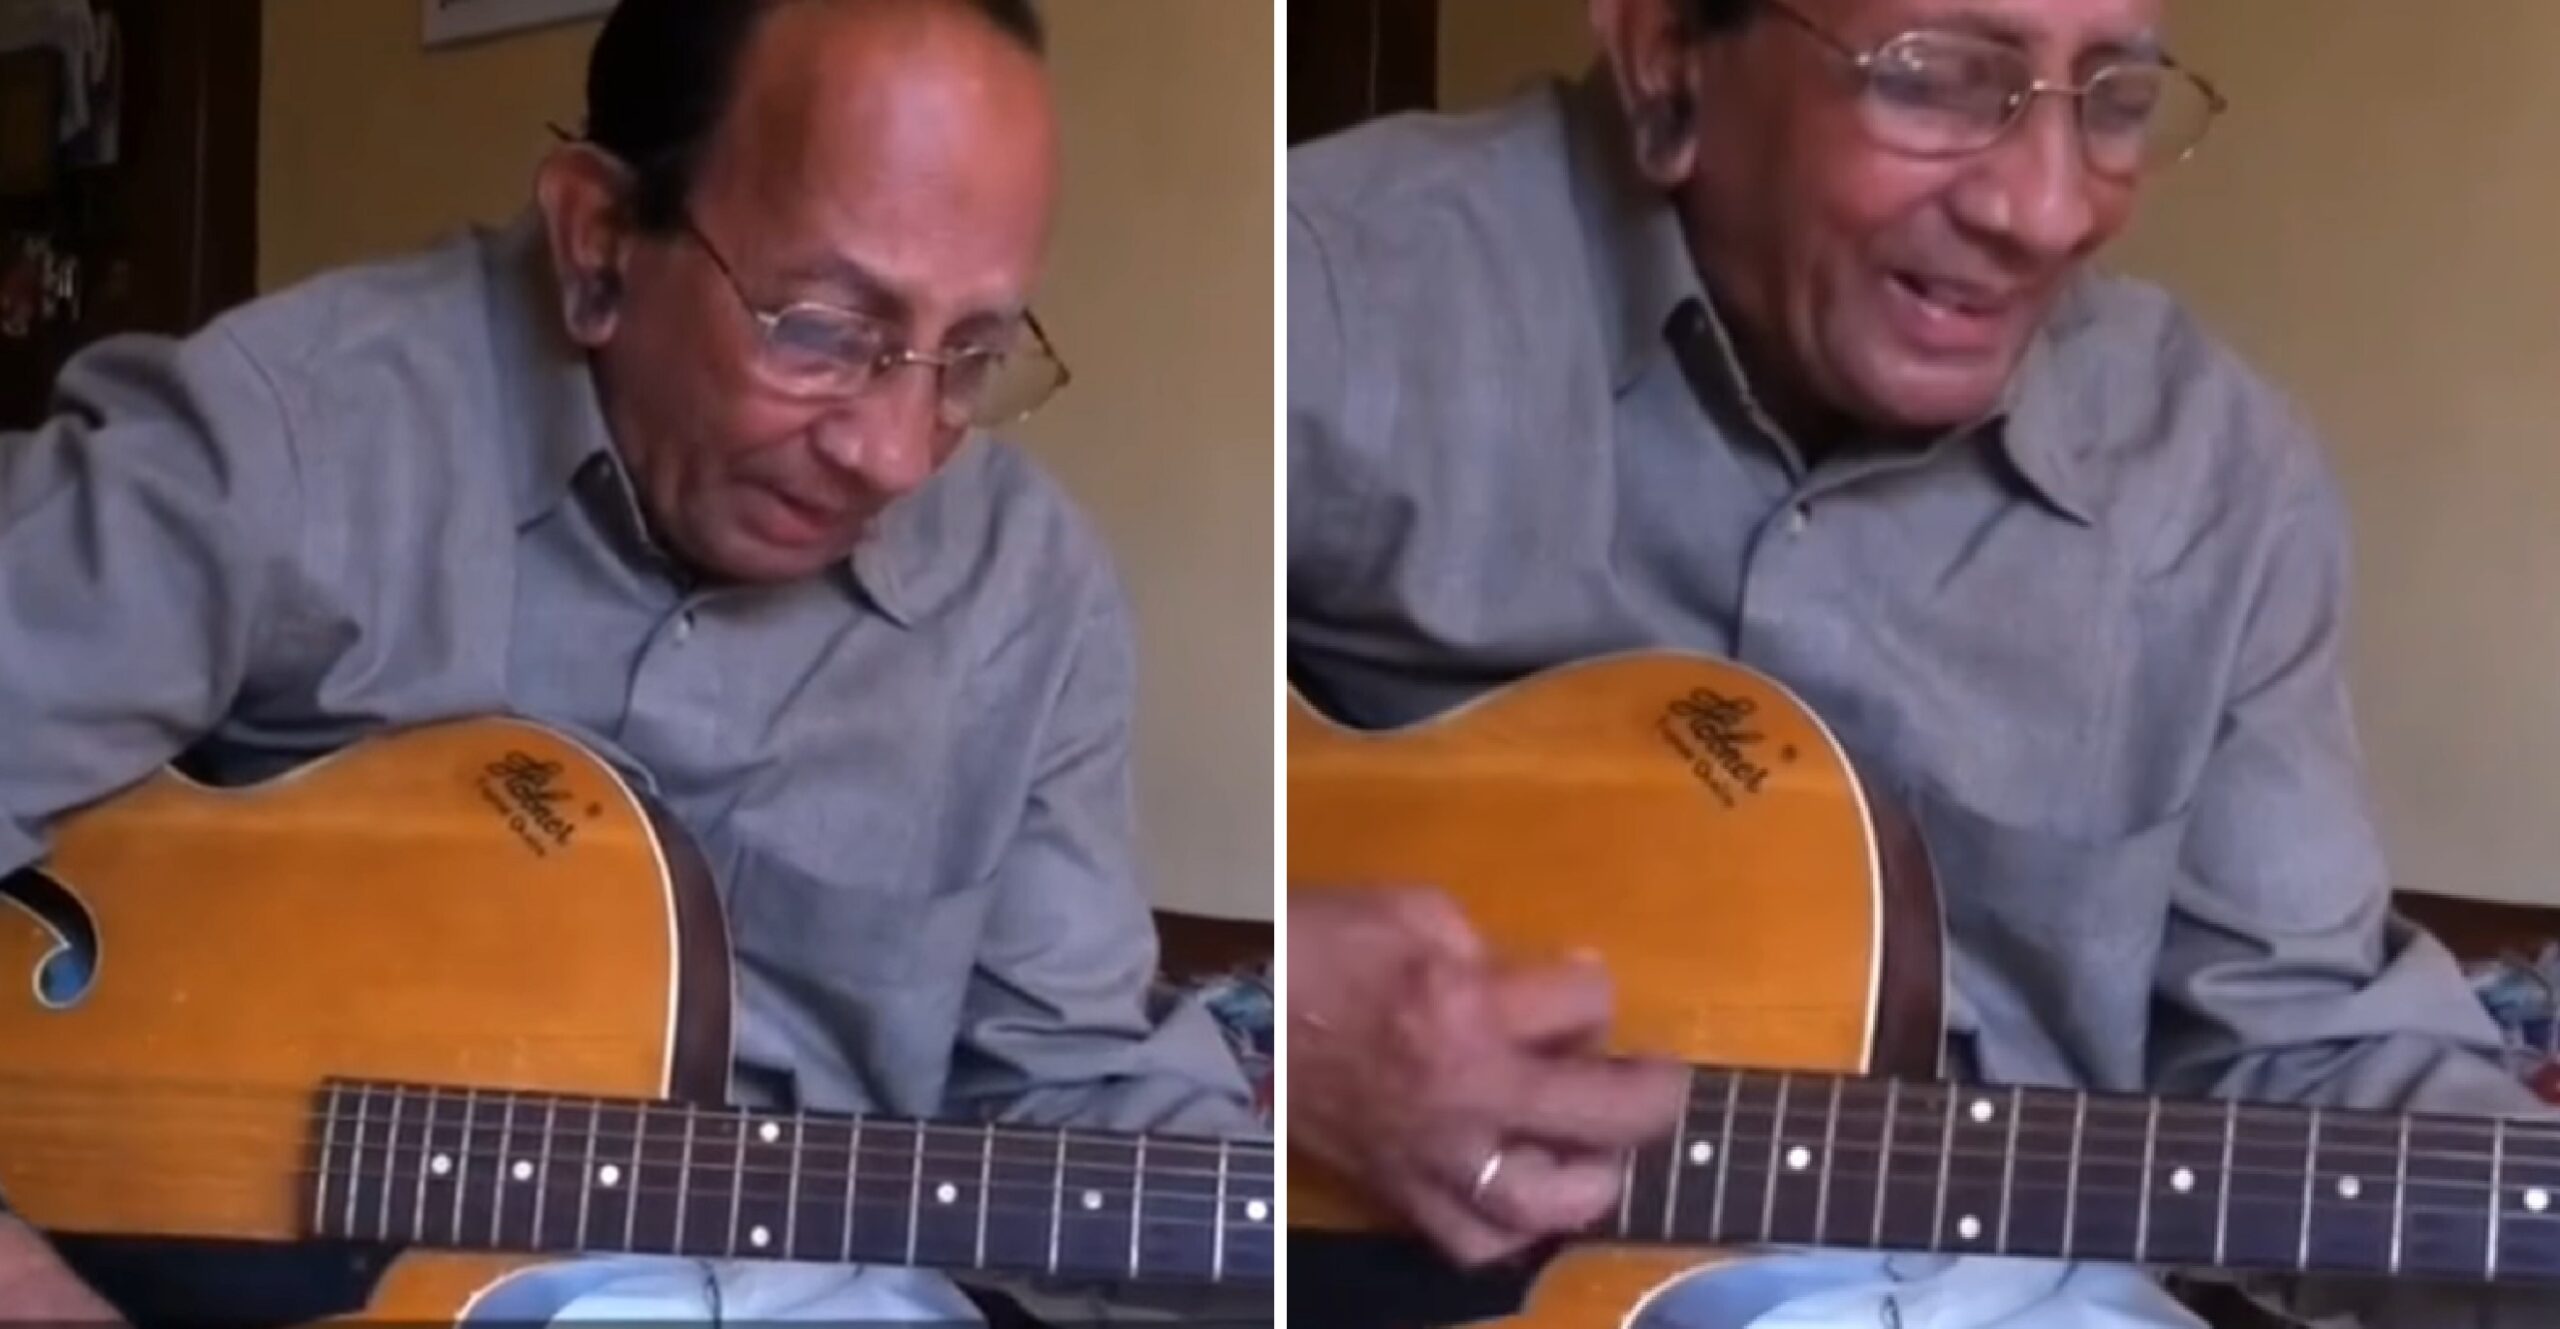 Old Is Gold: Watch As This Elderly Music Enthusiast Beautifully Strums Guitar And Sings ‘O Mere Sona’